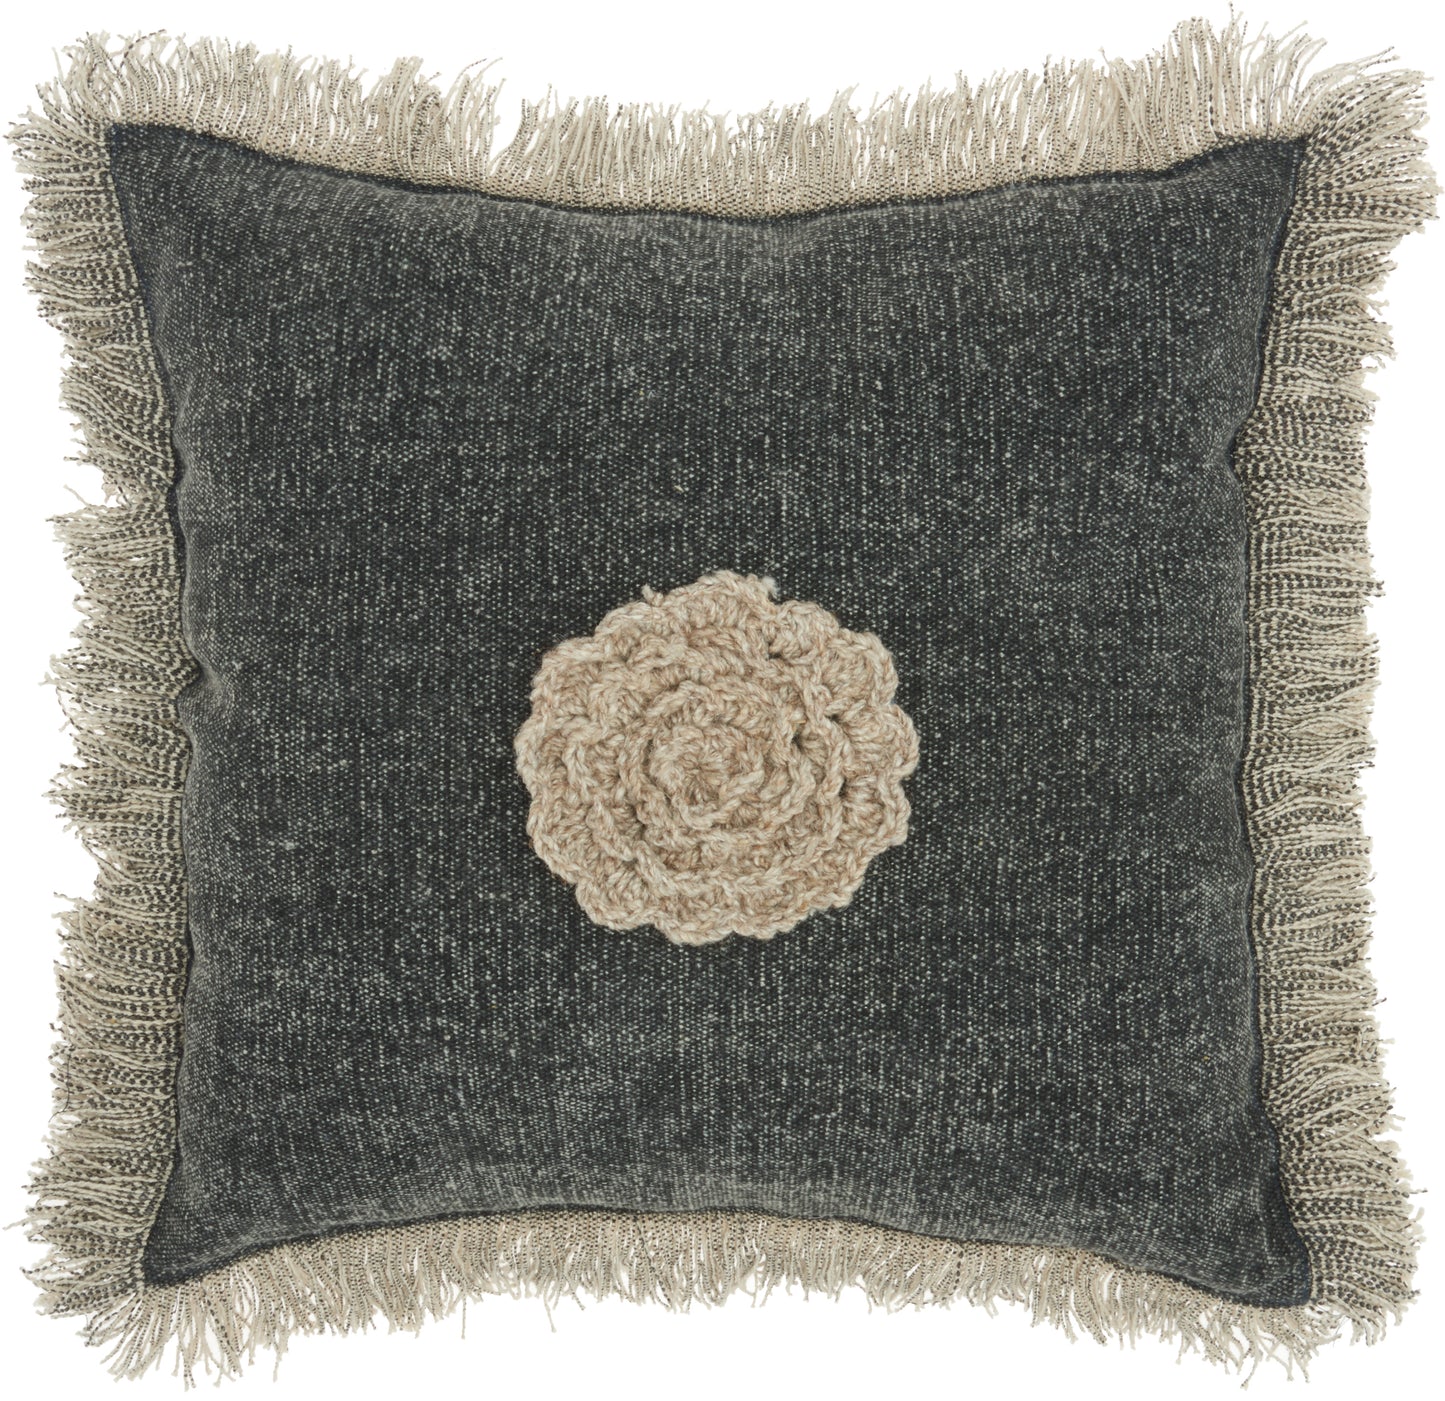 Life Styles GT060 Cotton Crochet Flower Throw Pillow From Mina Victory By Nourison Rugs